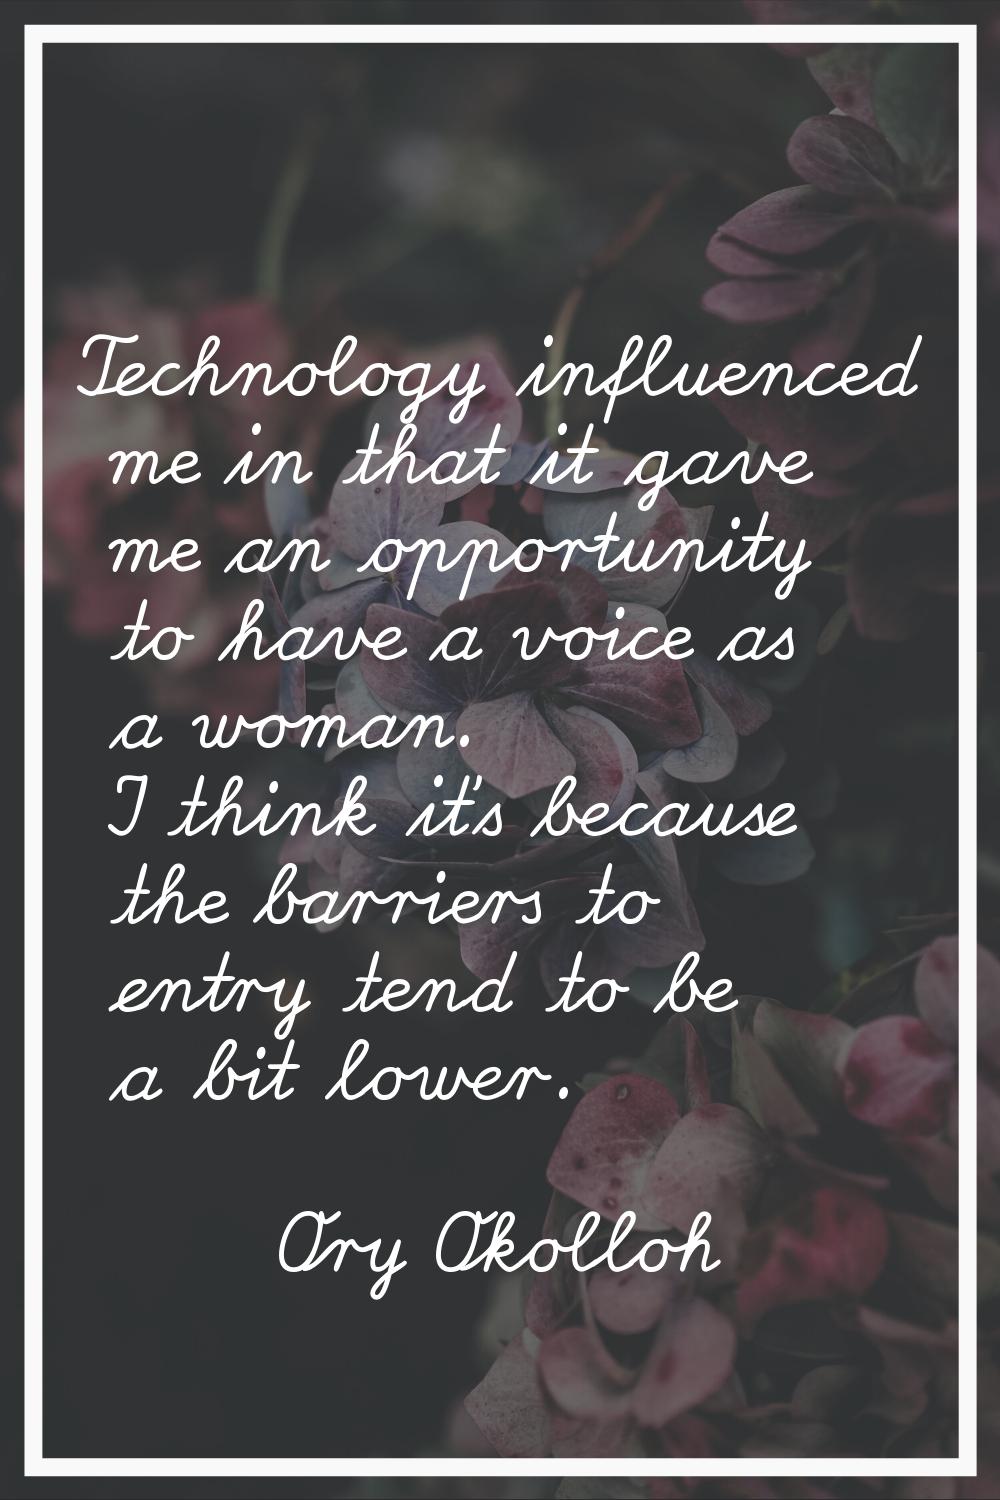 Technology influenced me in that it gave me an opportunity to have a voice as a woman. I think it's